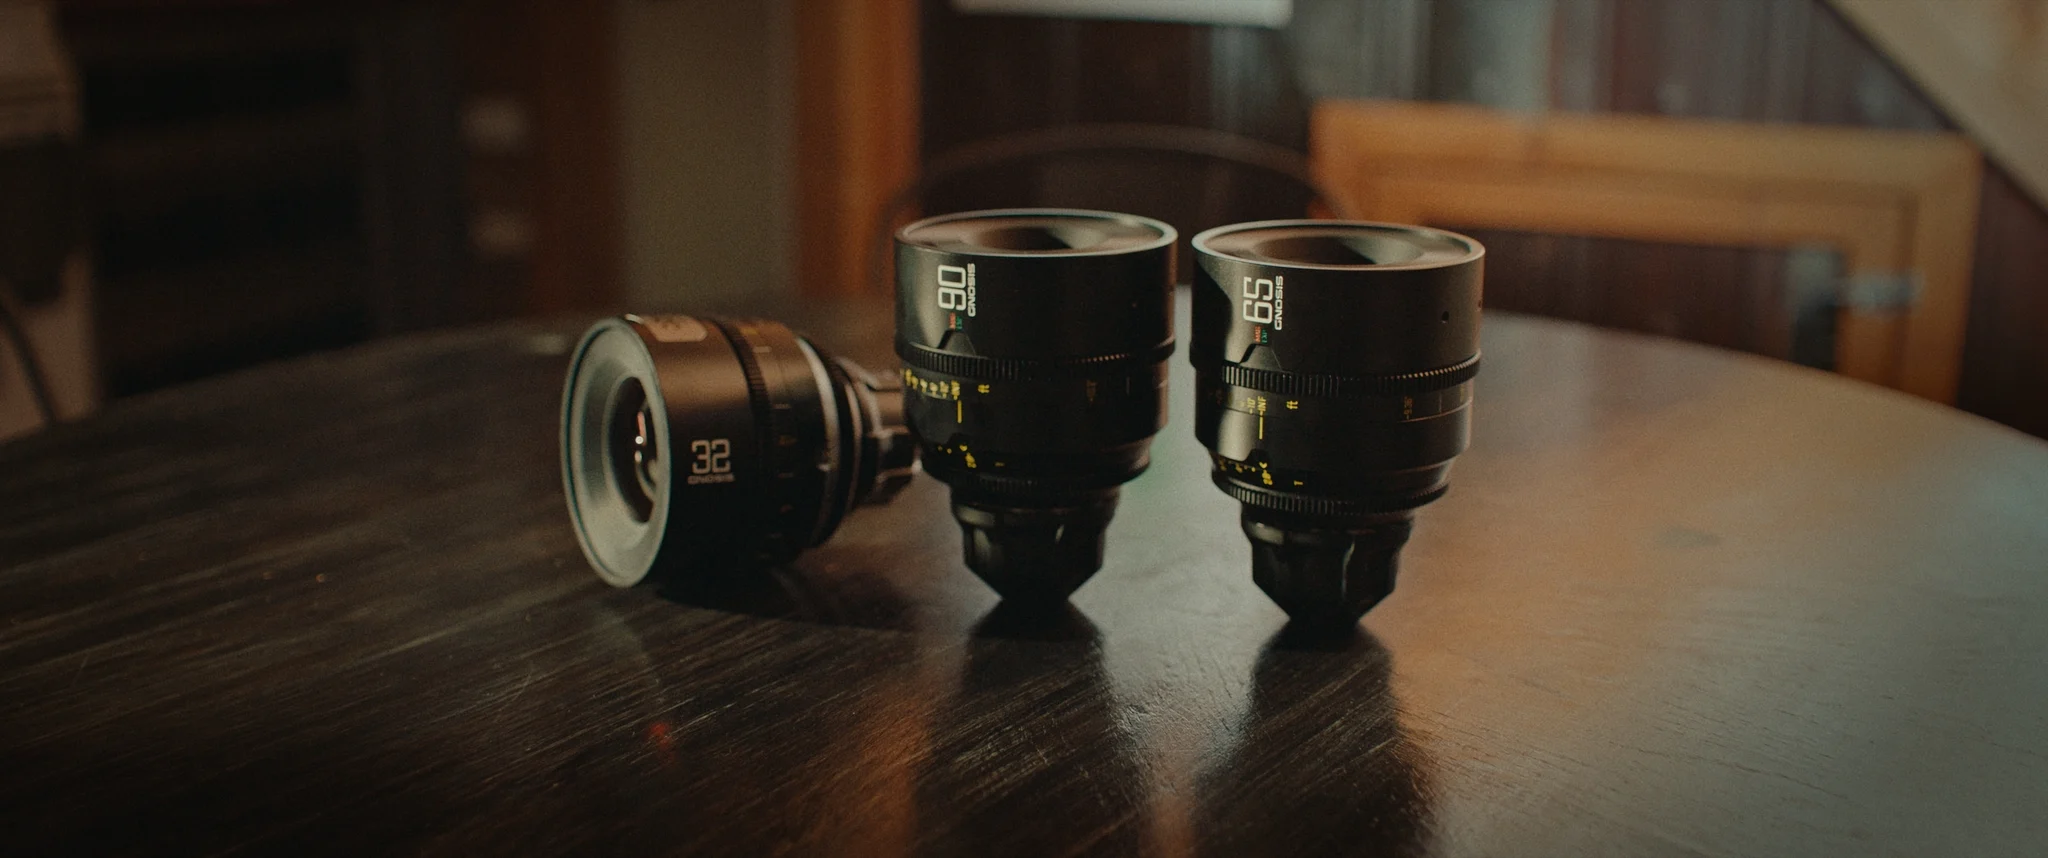 photo of three camera lenses on a wooden table